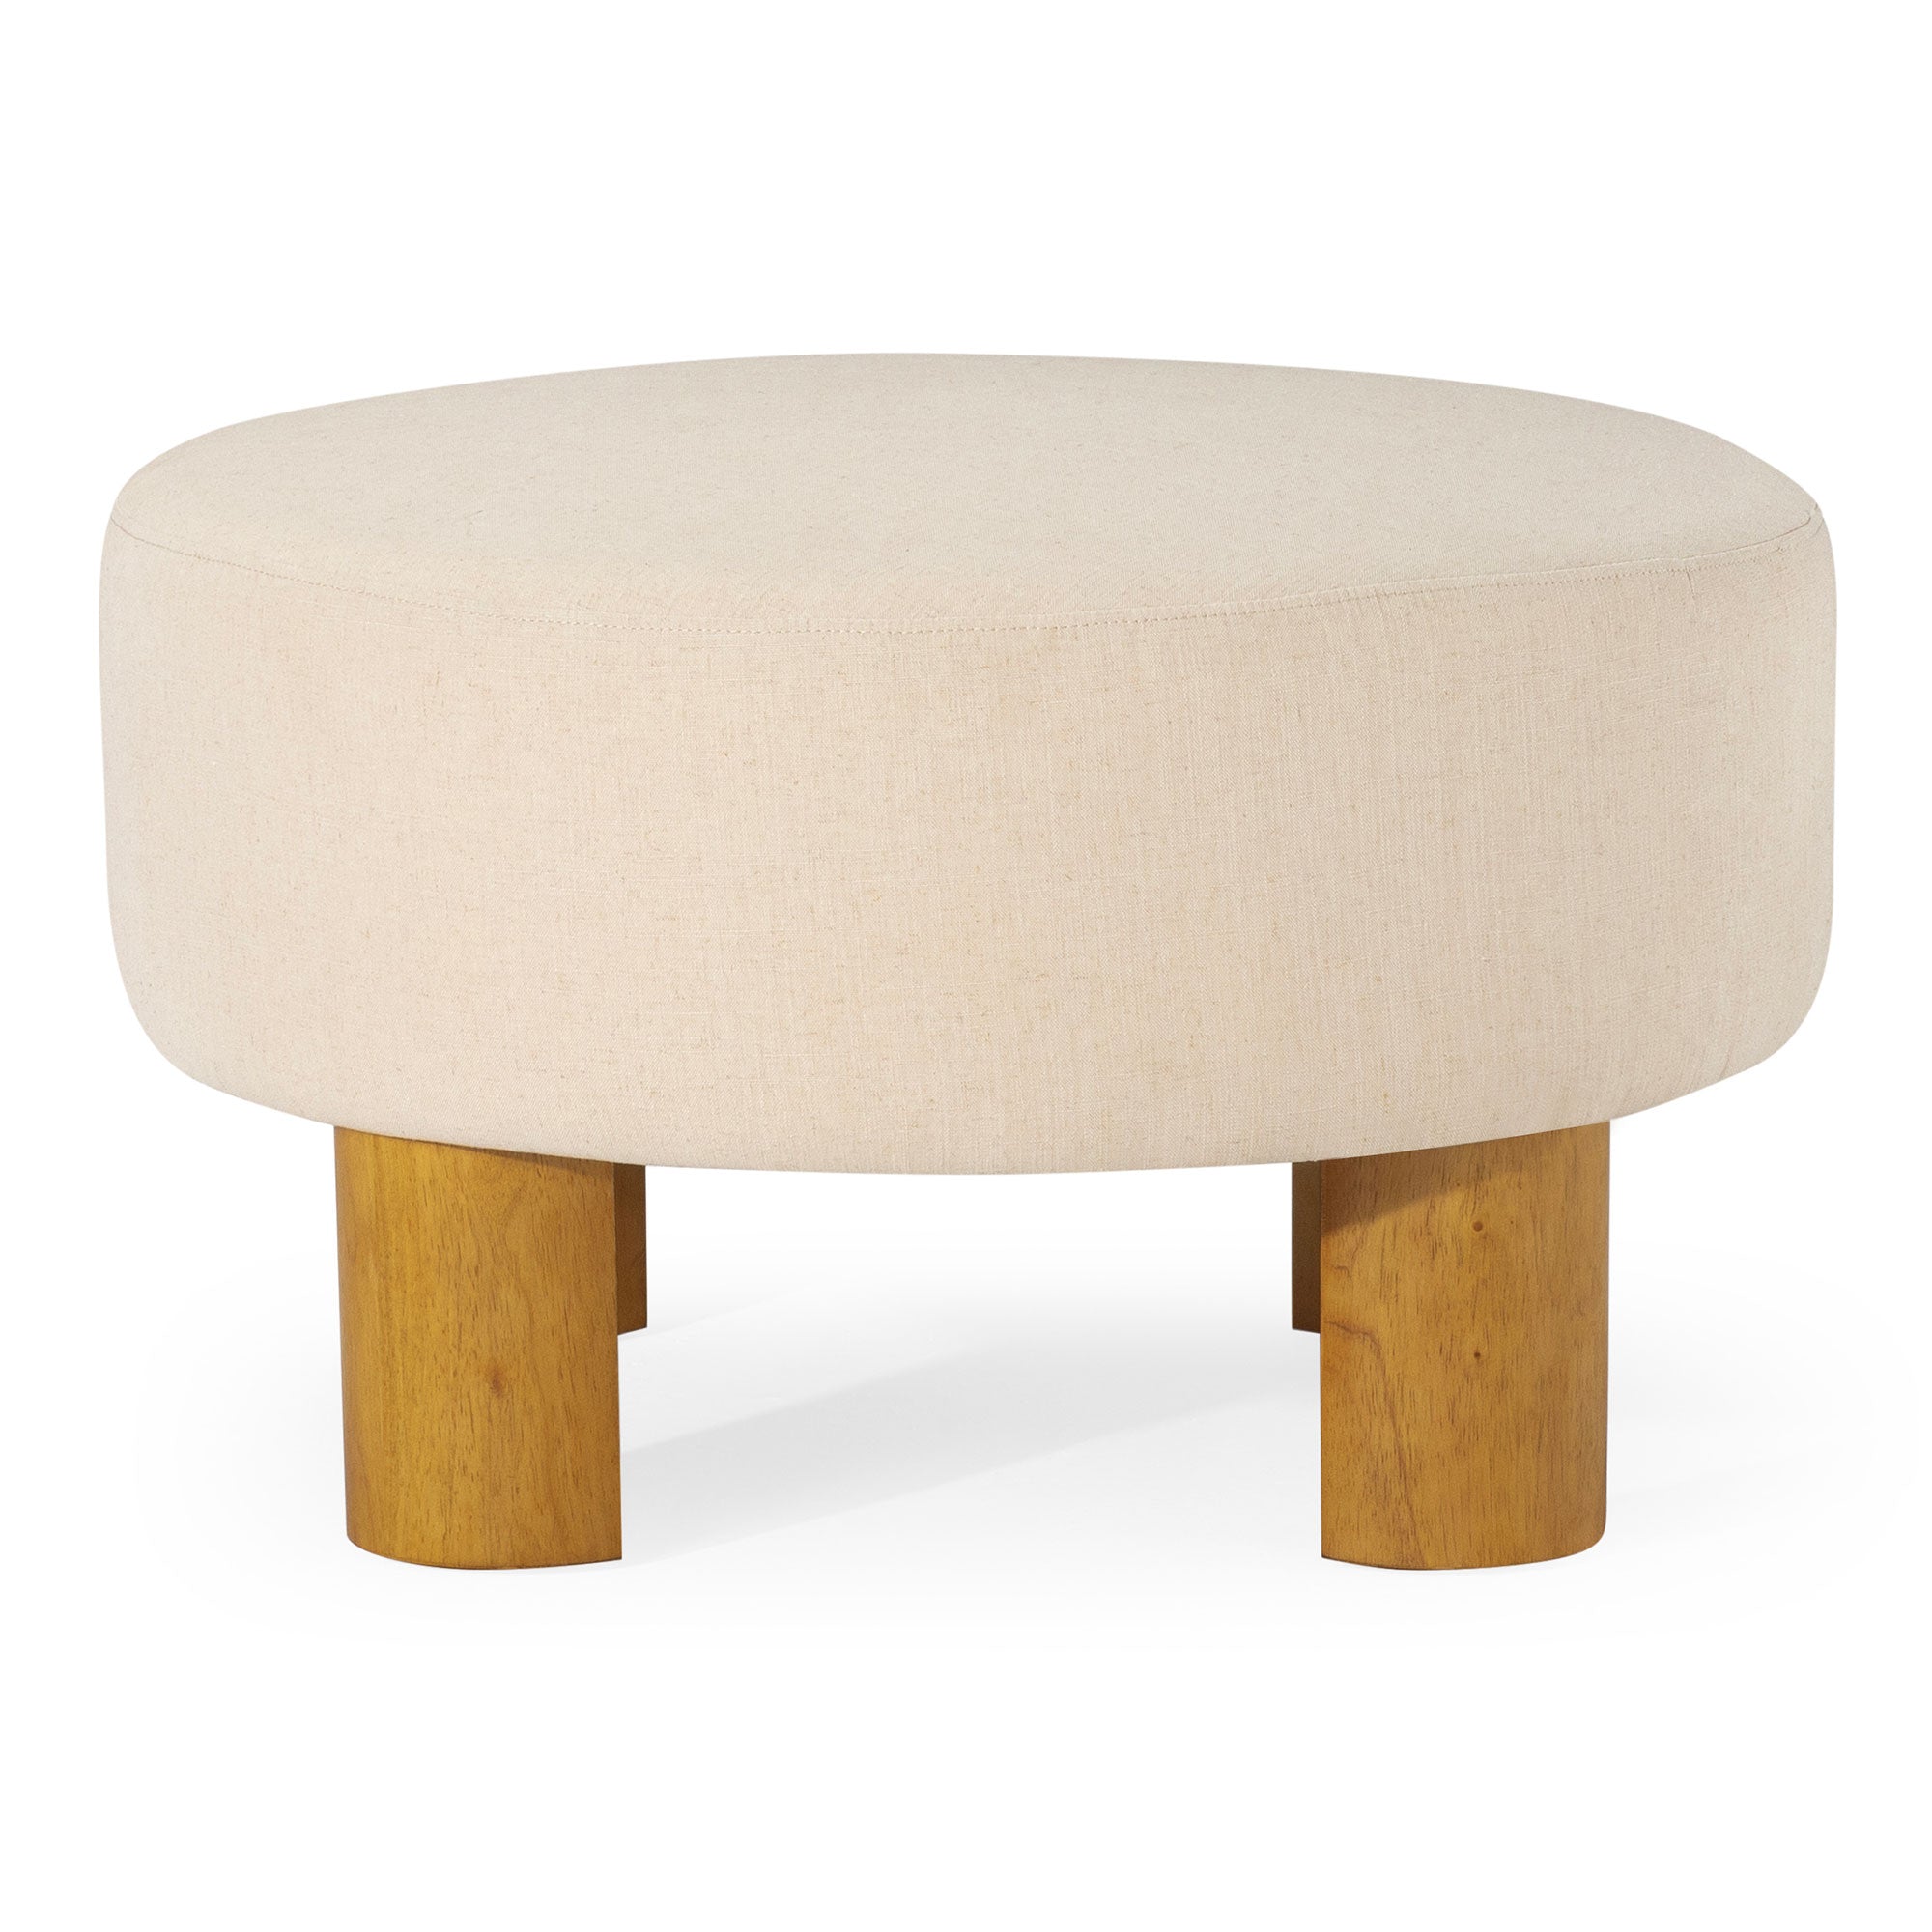 Celia Contemporary Upholstered Ottoman with Refined Natural Wood Finish in Ottomans & Benches by Maven Lane